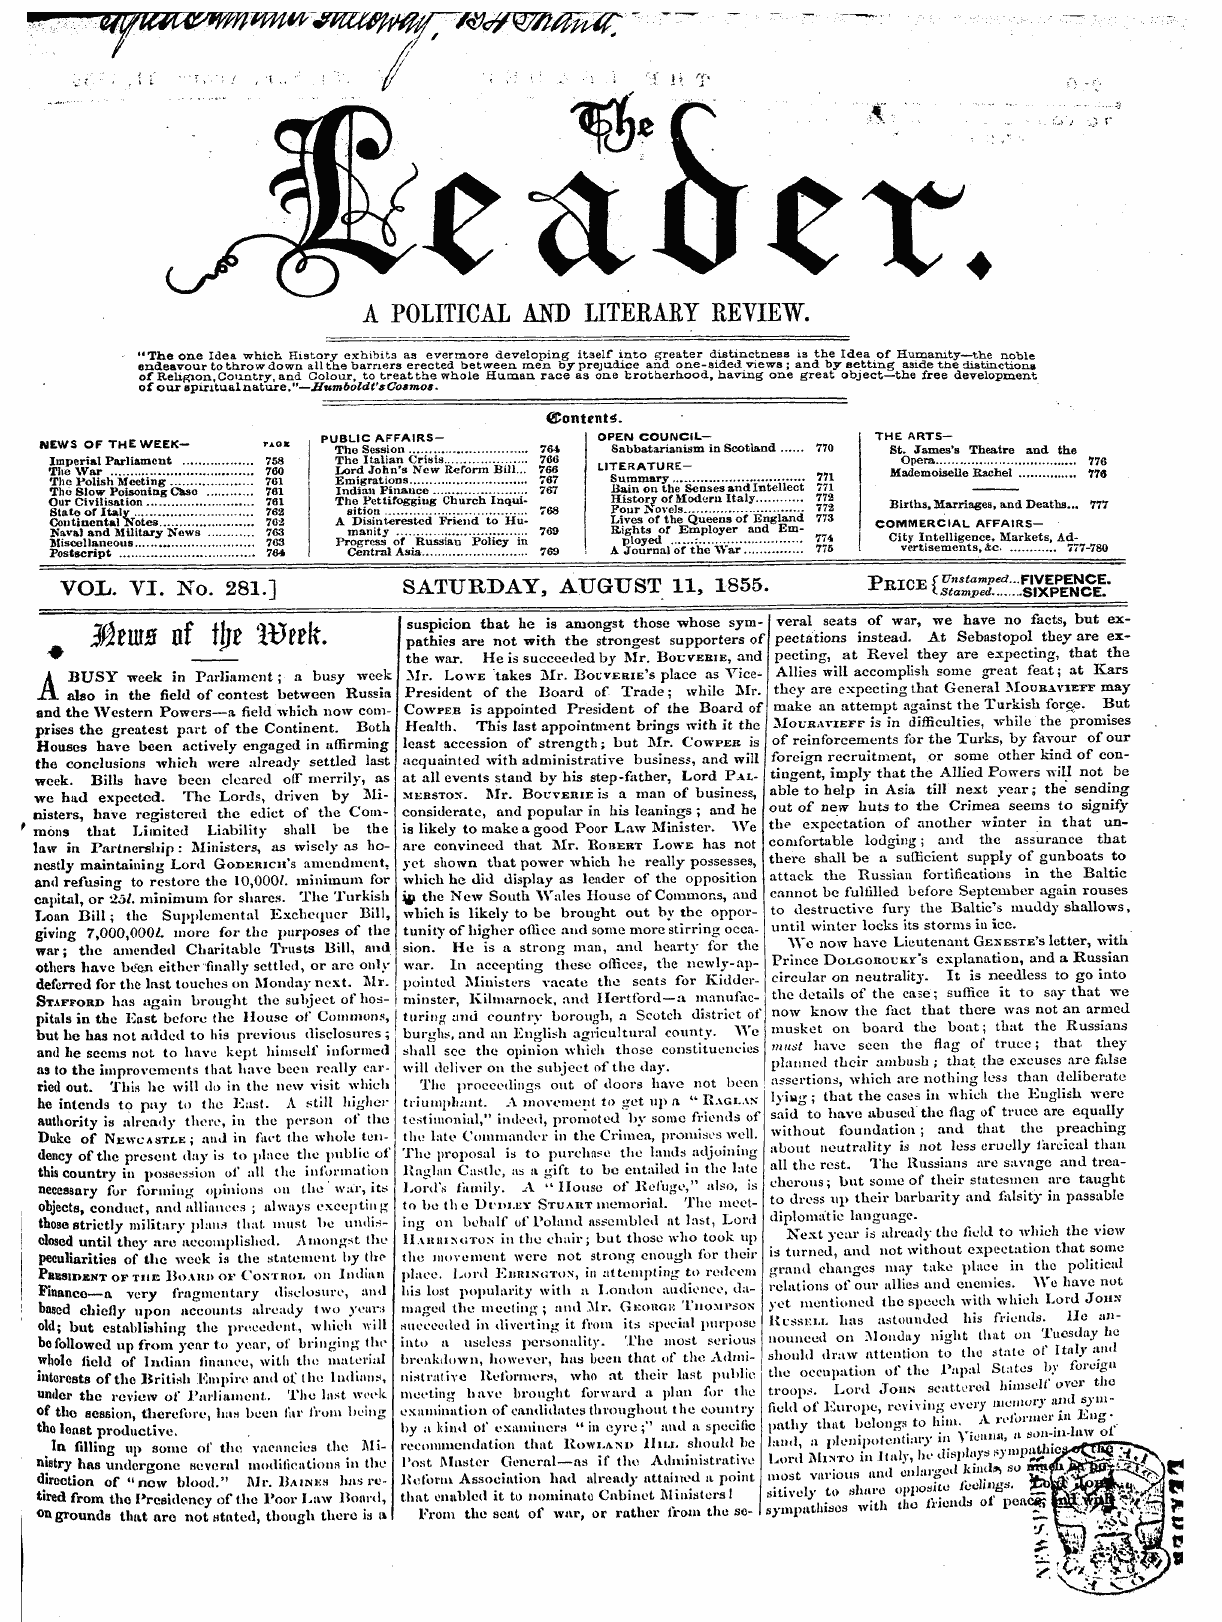 Leader (1850-1860): jS F Y, 2nd edition - Vccl. Vi. No. 281.] Saturday, August 11,...